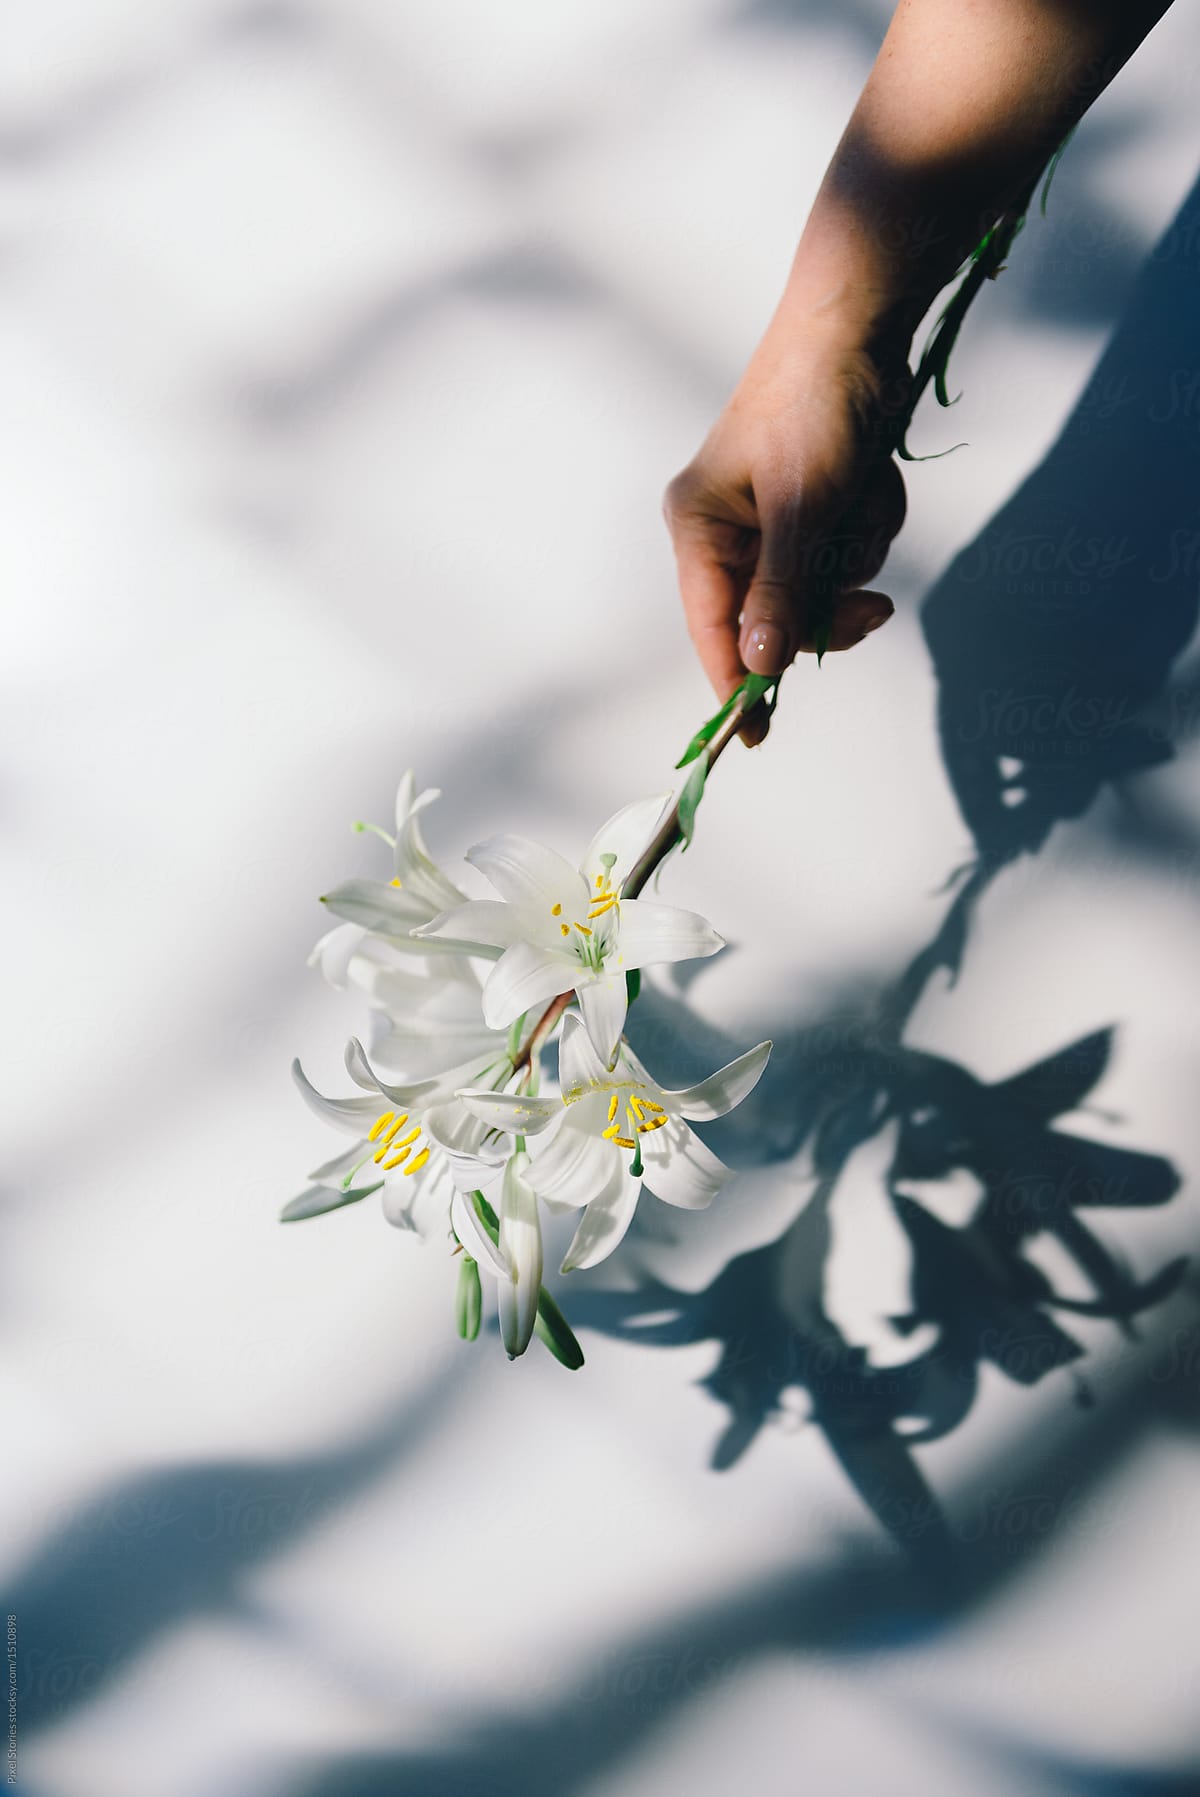 Hand with white Lily